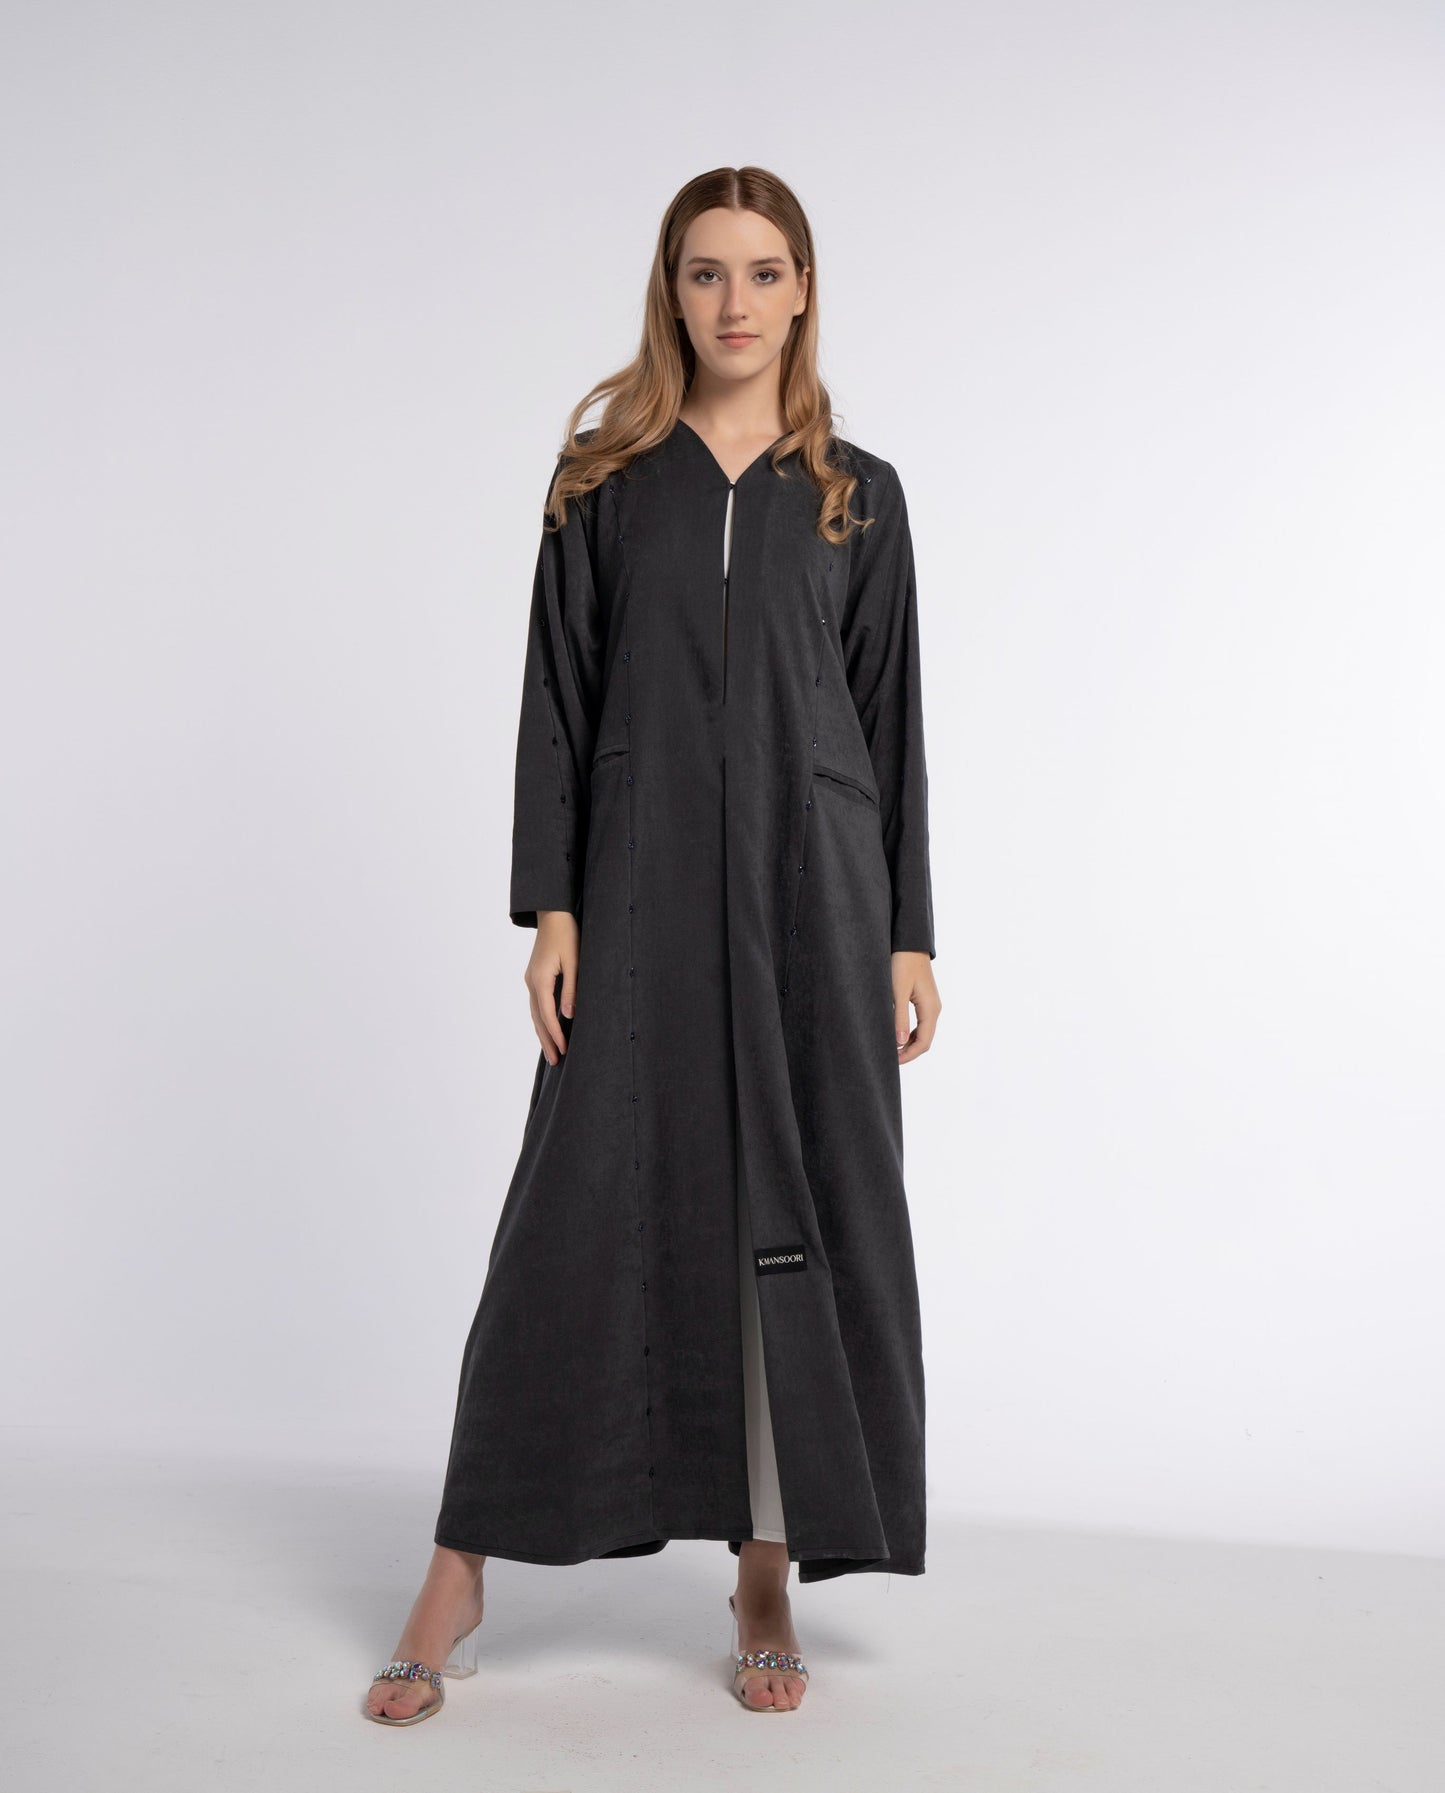 Grey Colored V-Neck Abaya with Elegant Black Beaded Embellishments and Two Front Side Pockets